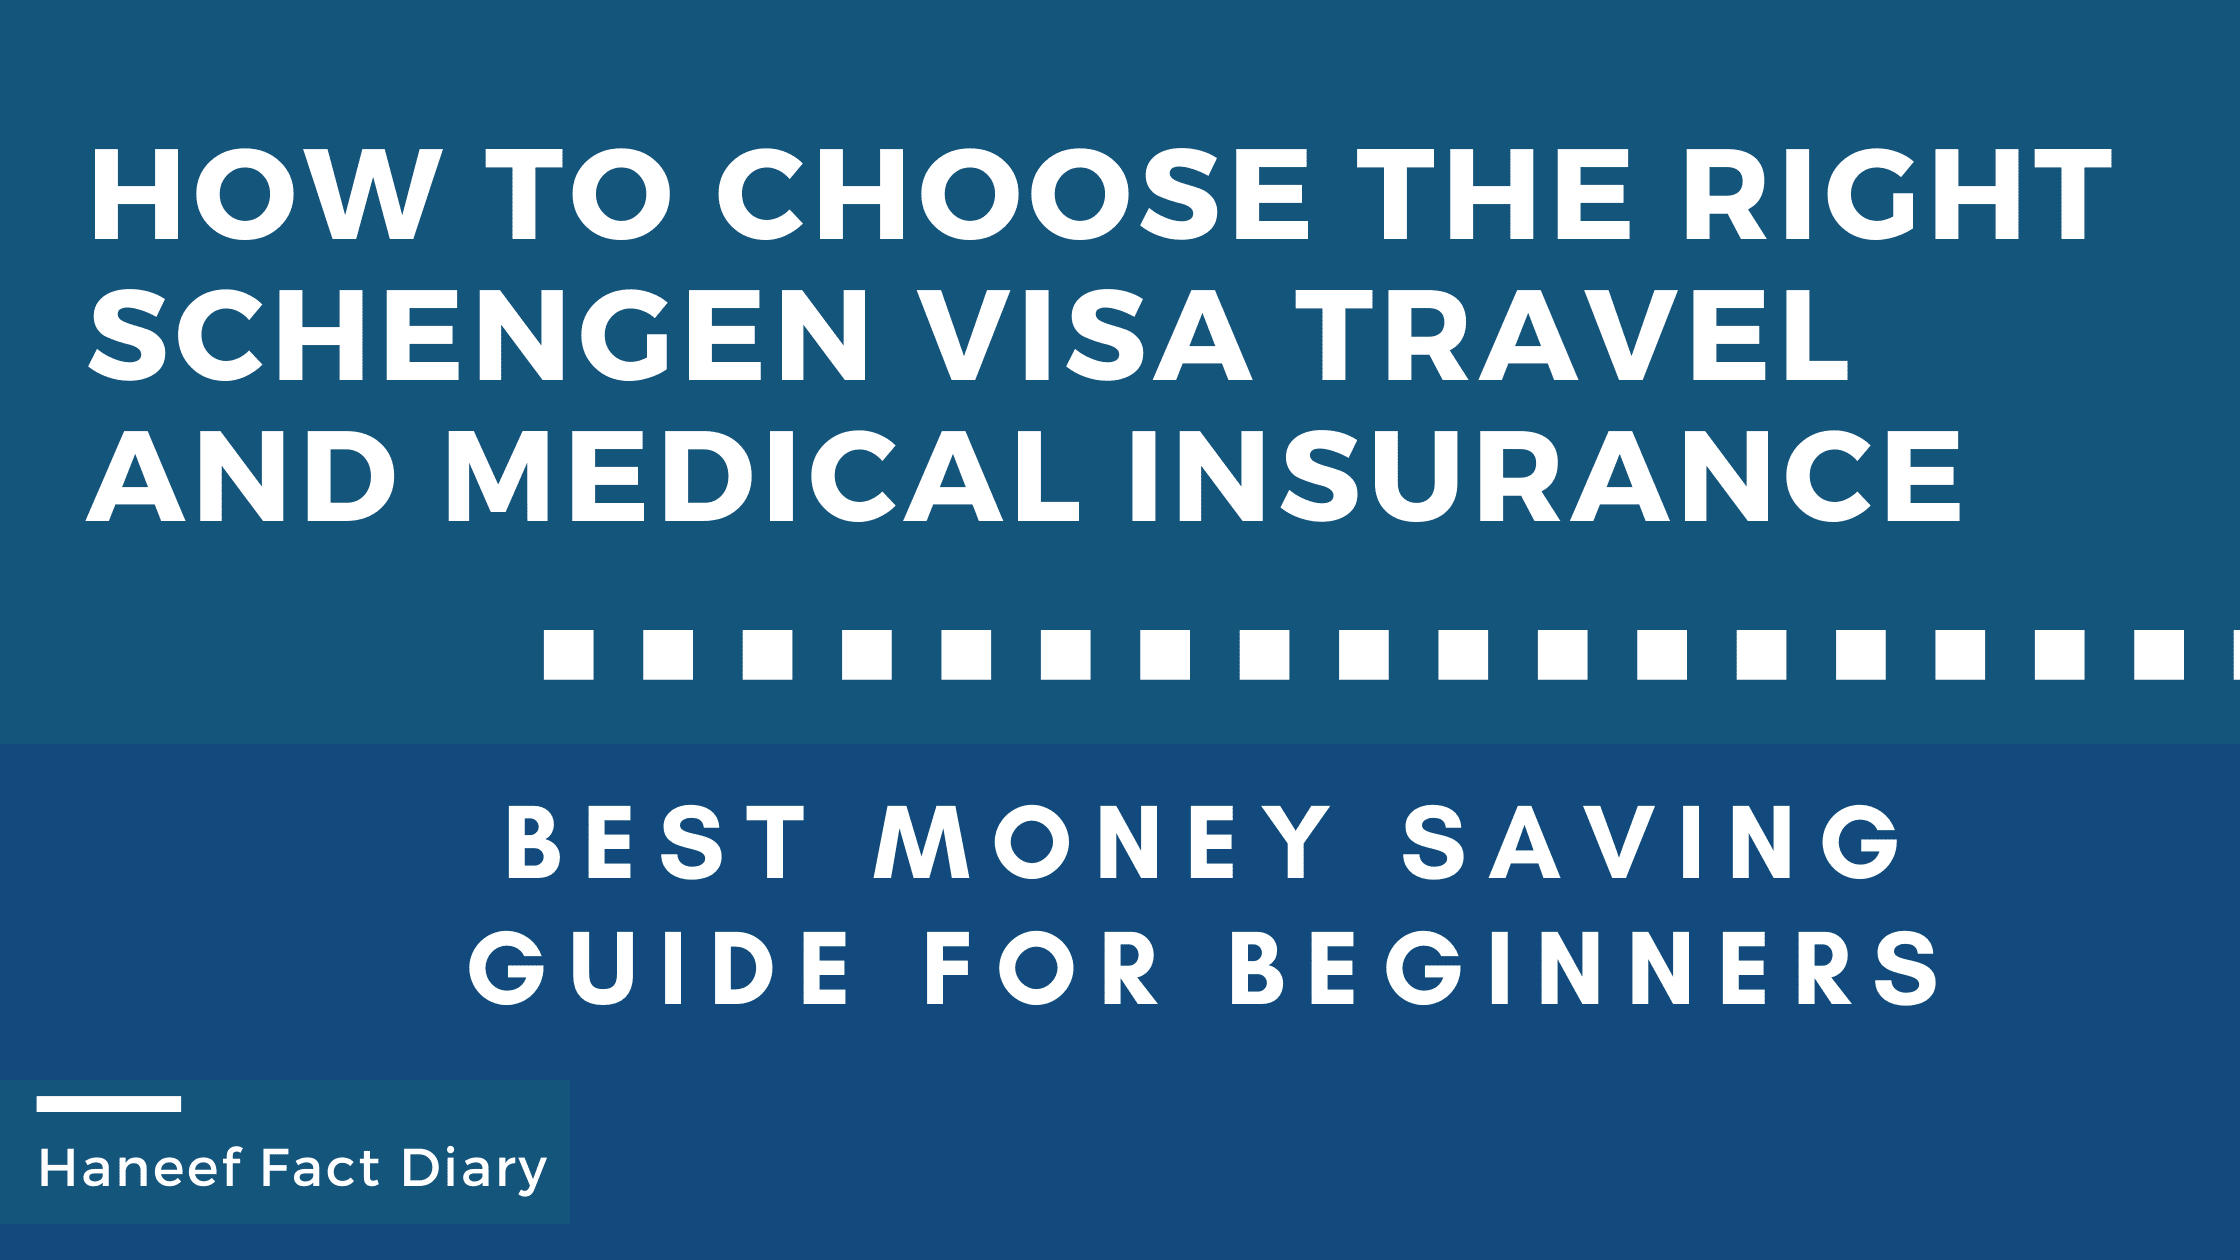 How to Choose the Right Schengen Visa Travel and Medical Insurance